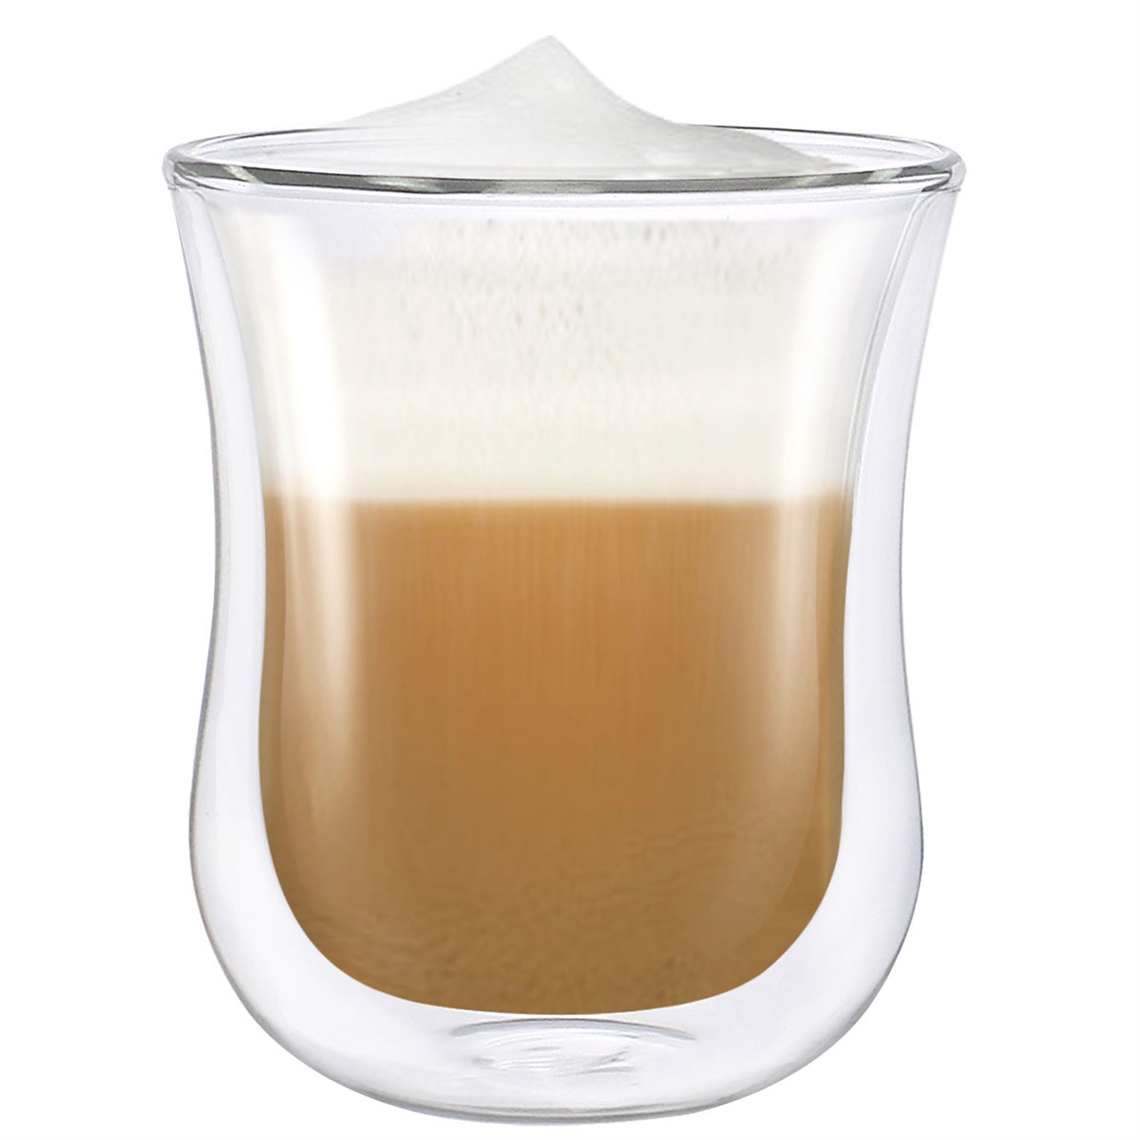 View more restaurant glasses - glencairn from our Tea & Coffee Cups range